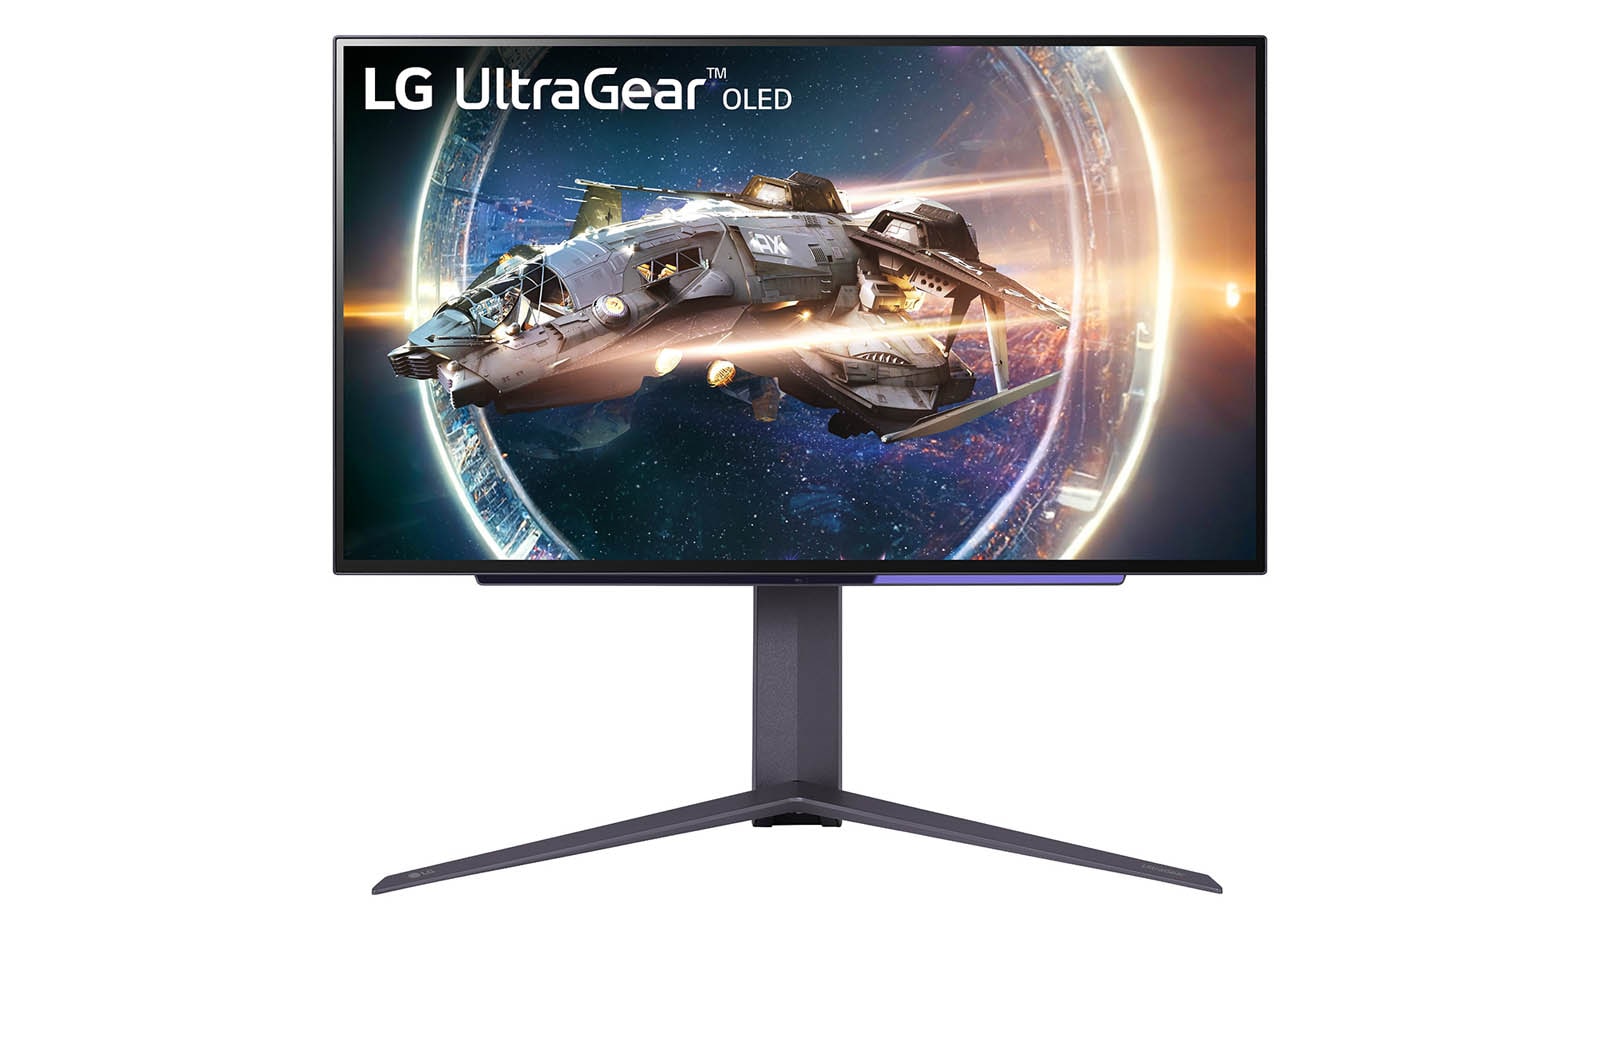 27” UltraGear™ QHD OLED Gaming Monitor with 240Hz Refresh Rate